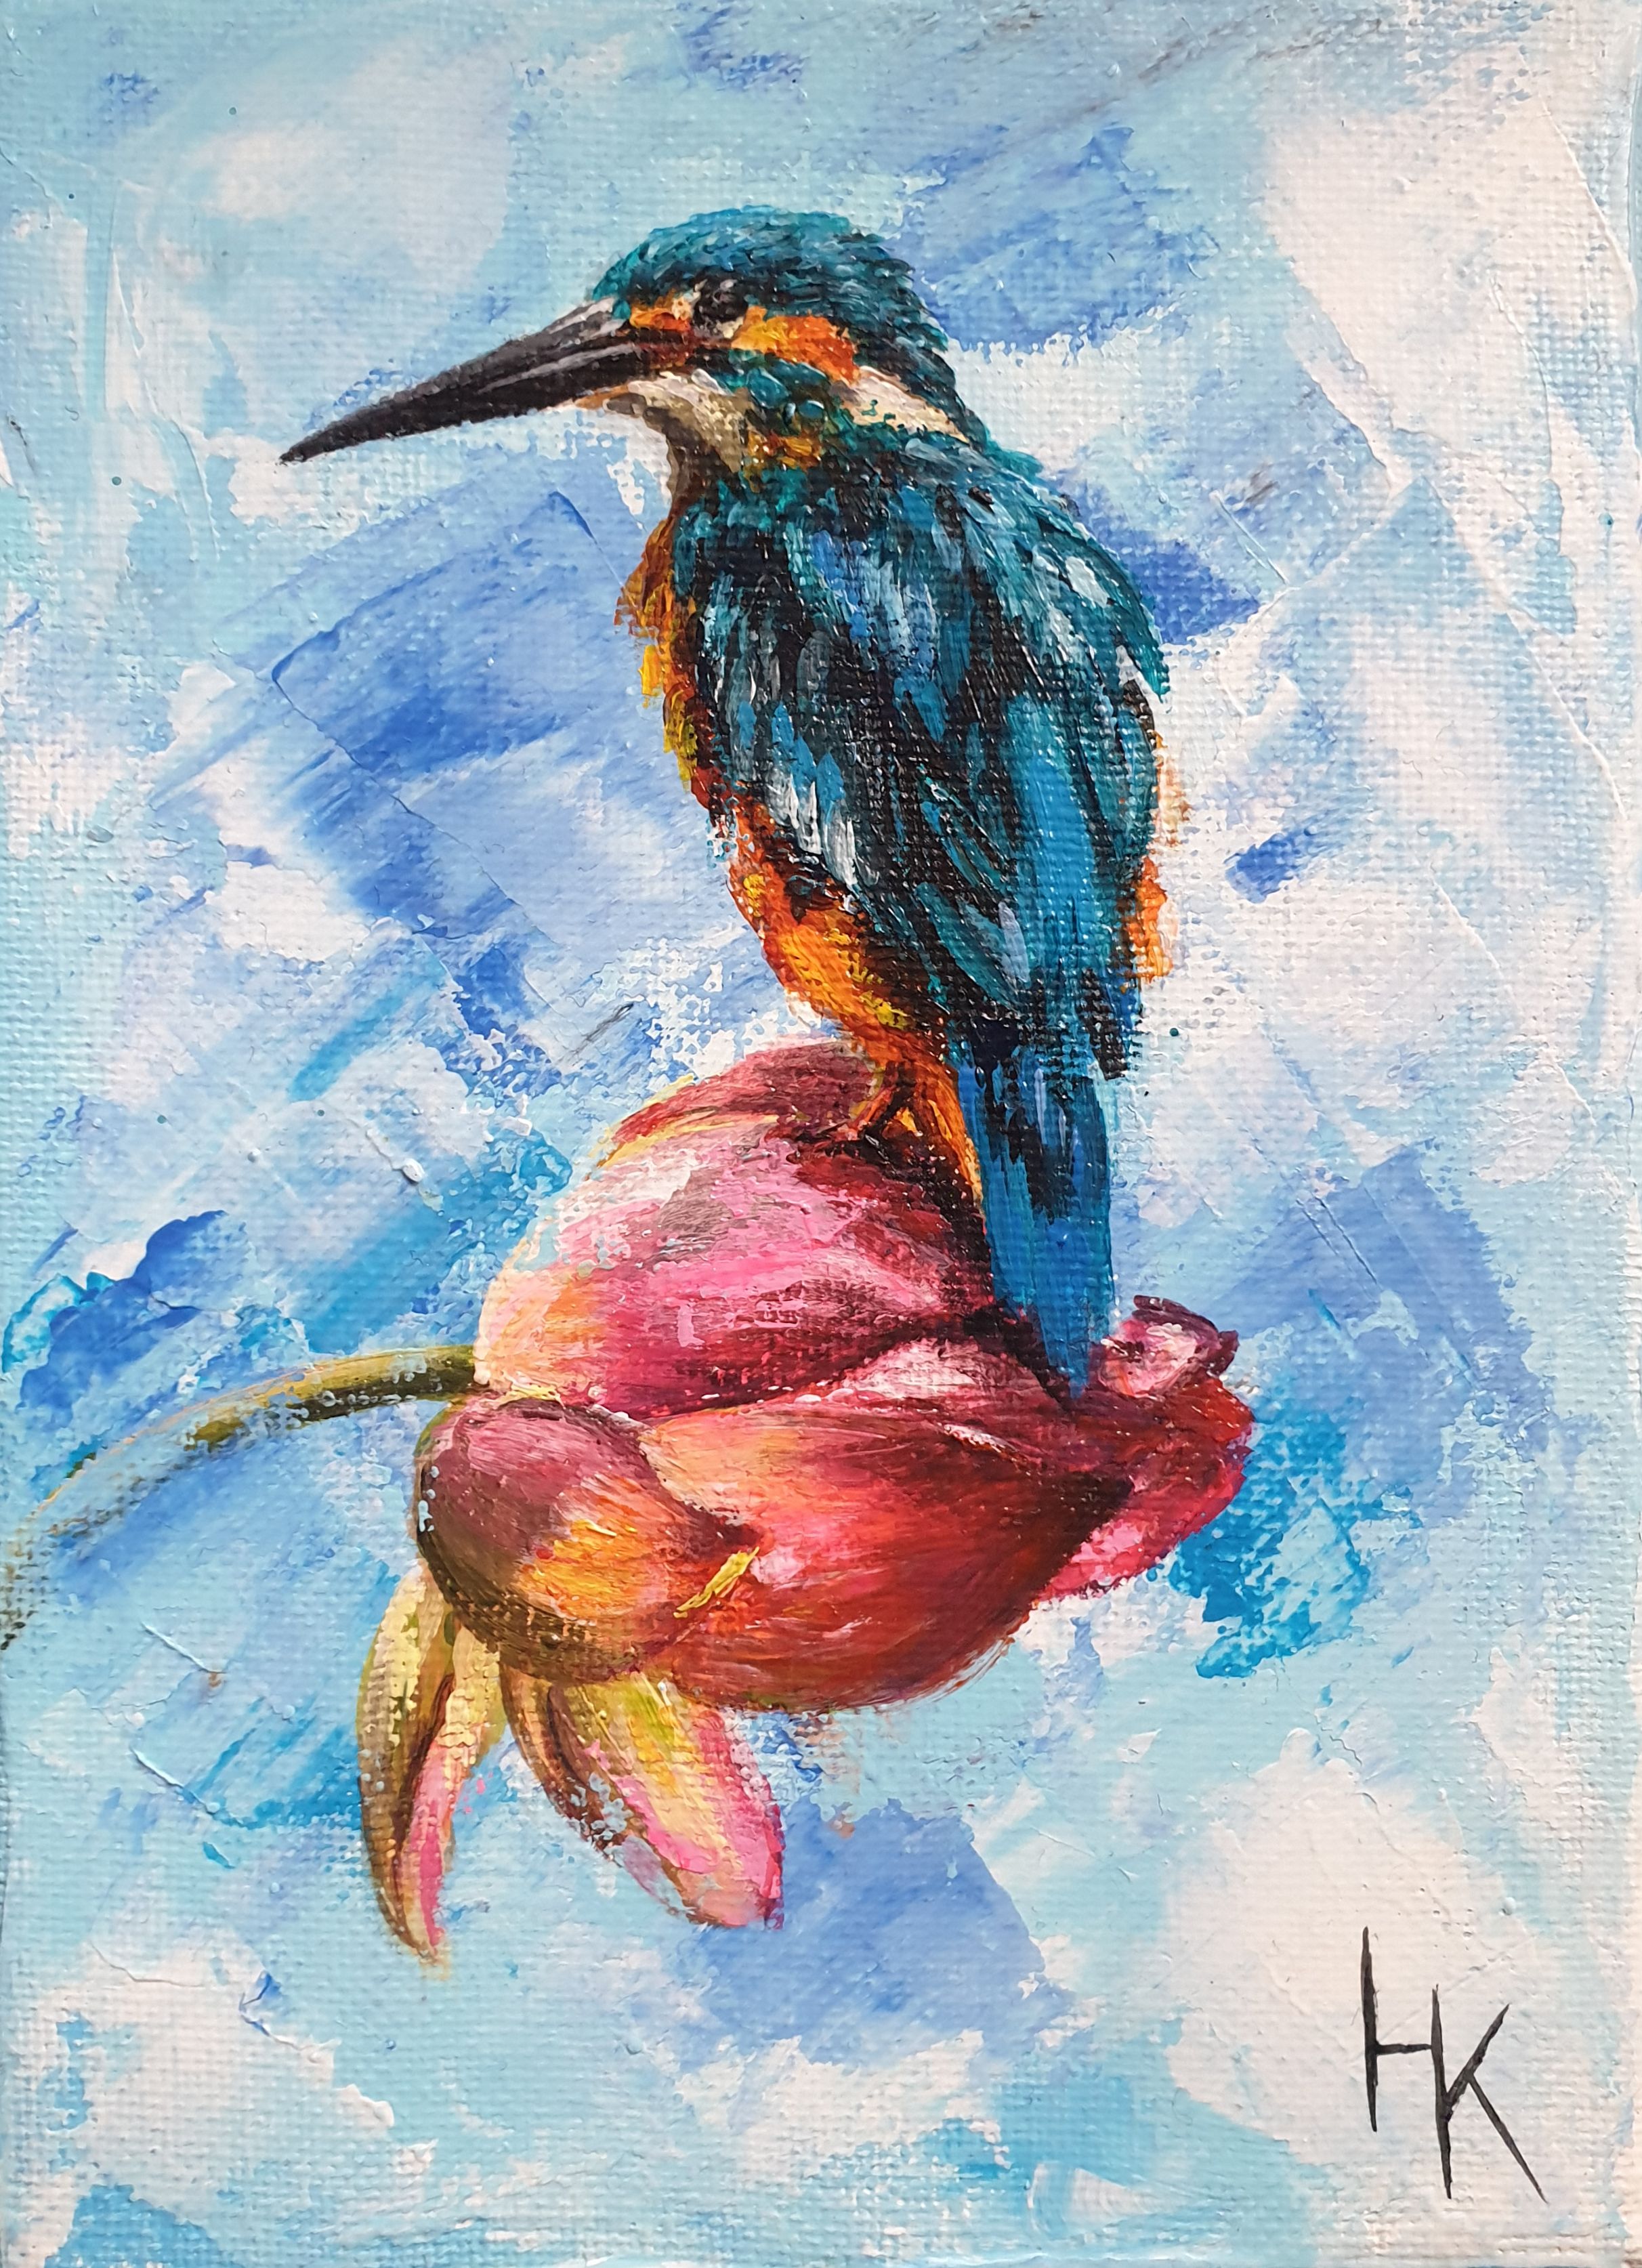 FROM KINGFISHER SERIES